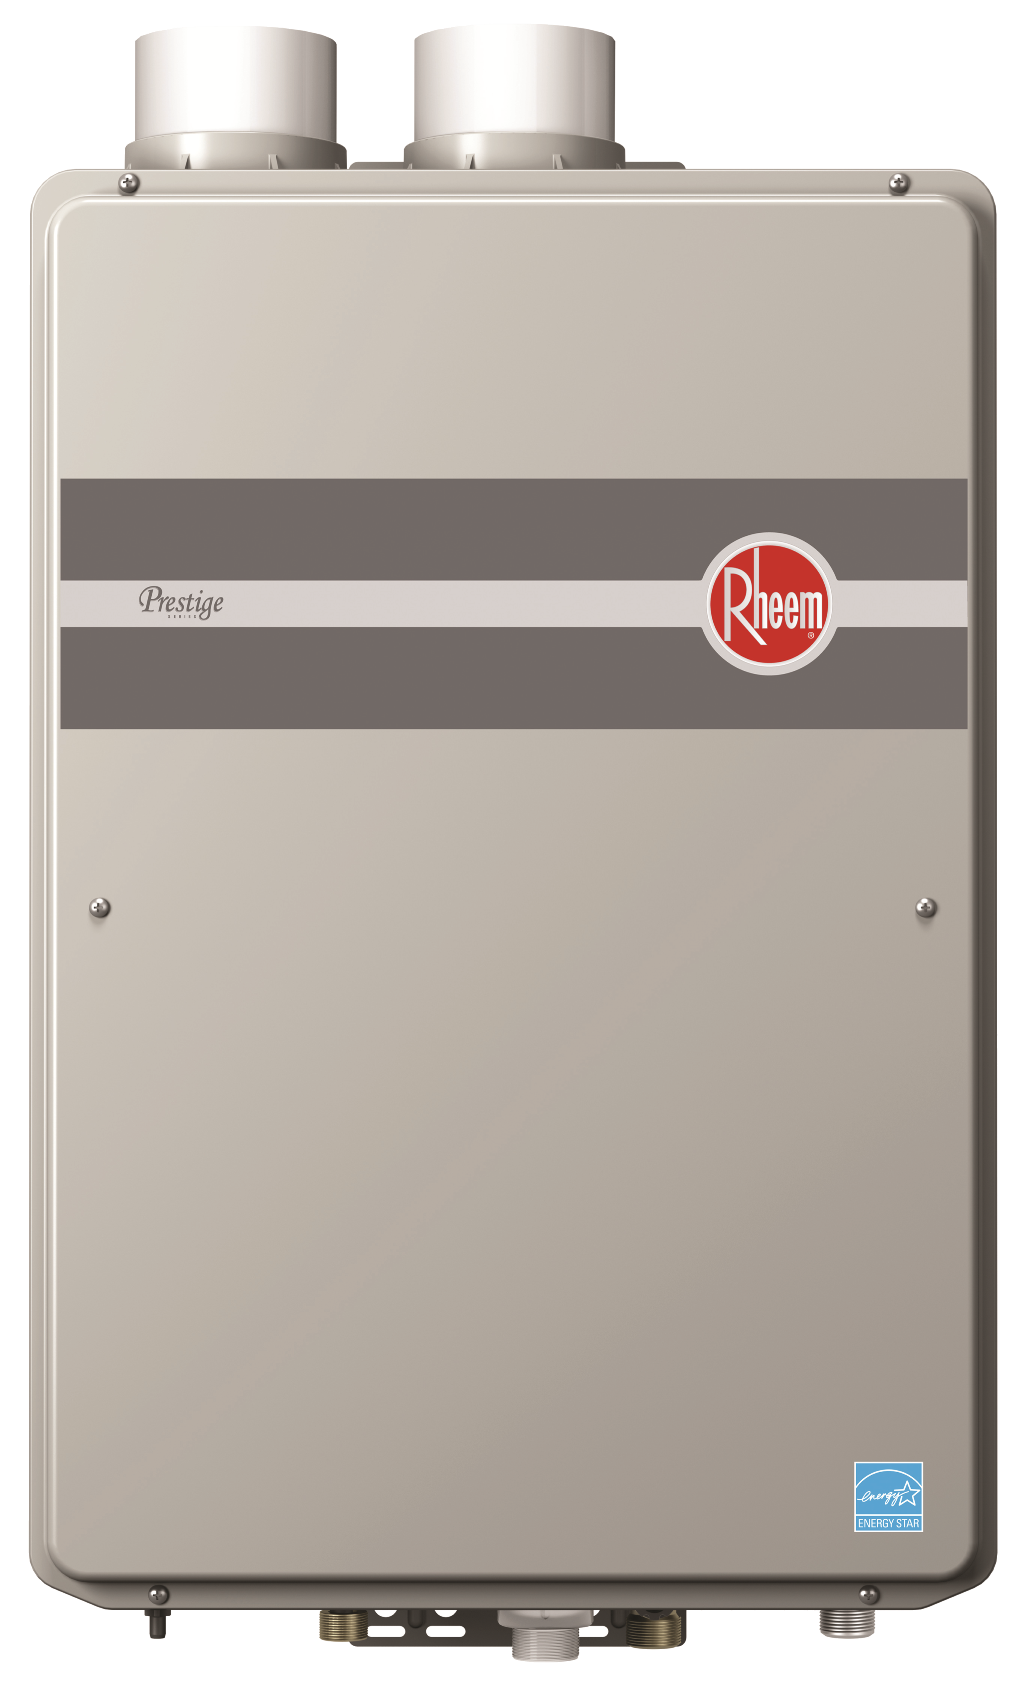 highly-efficient-rheem-tankless-water-heaters-now-available-at-gp